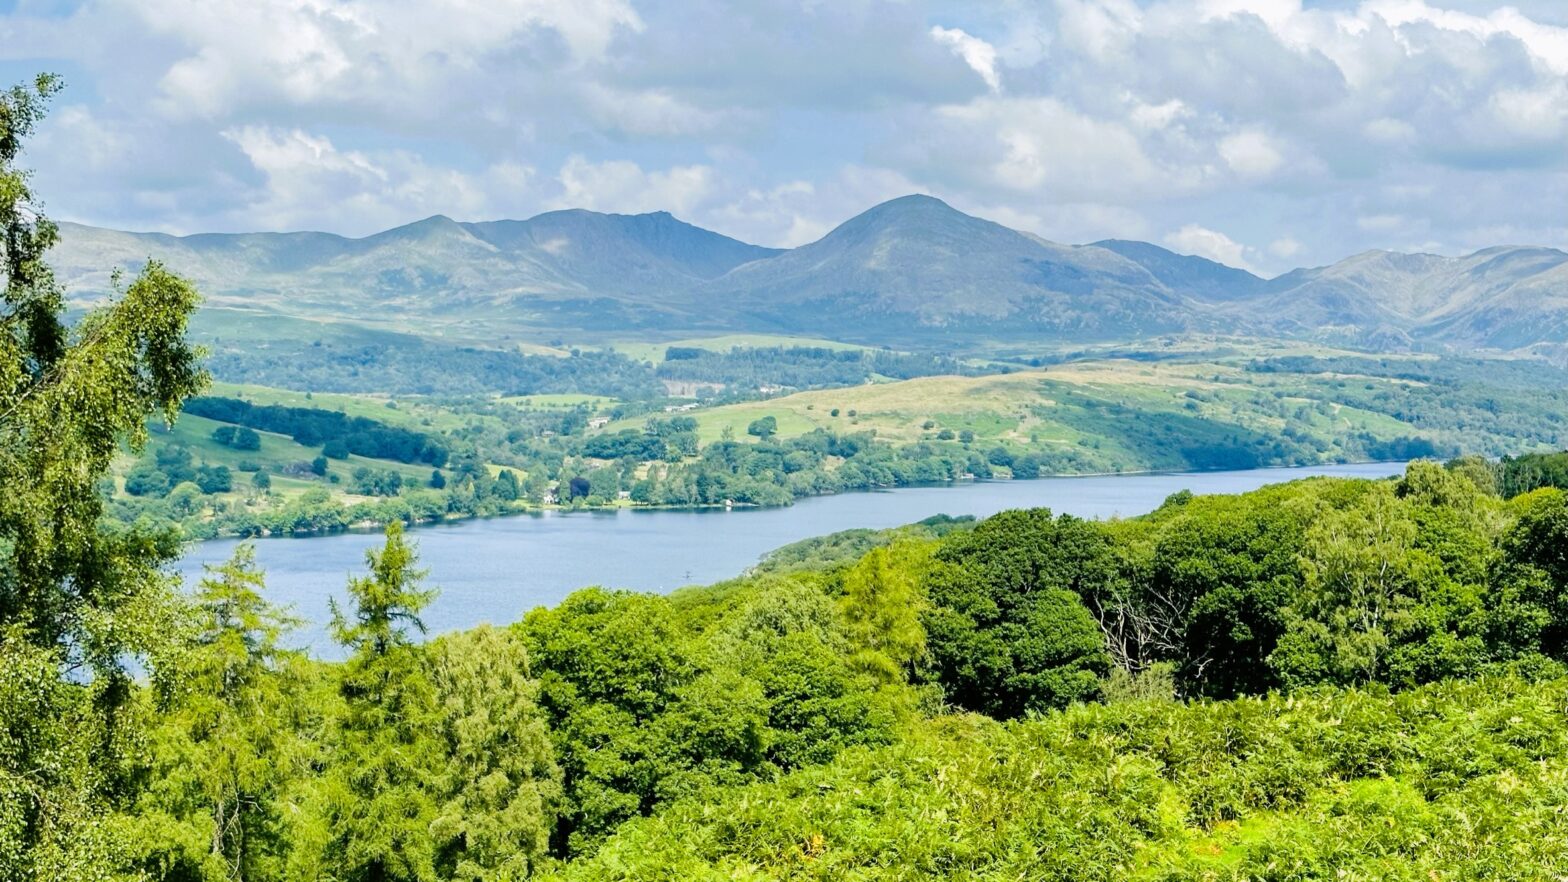 View of Coniston Water and Coniston fells